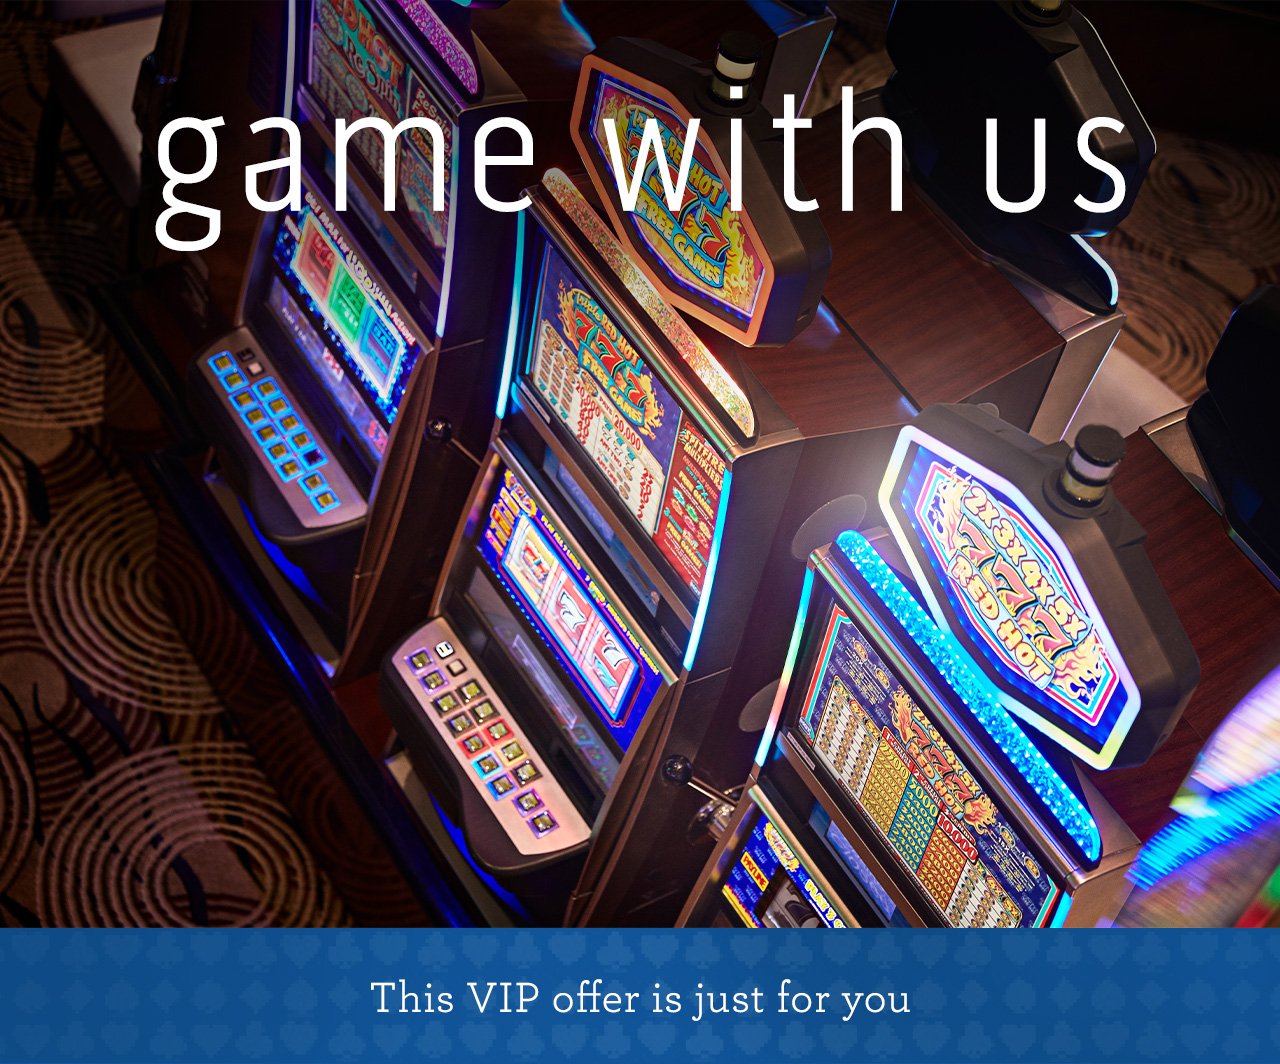 Image looking down at a row of illuminated colorful slot machines in the casino | game with us - This VIP offer is just for you